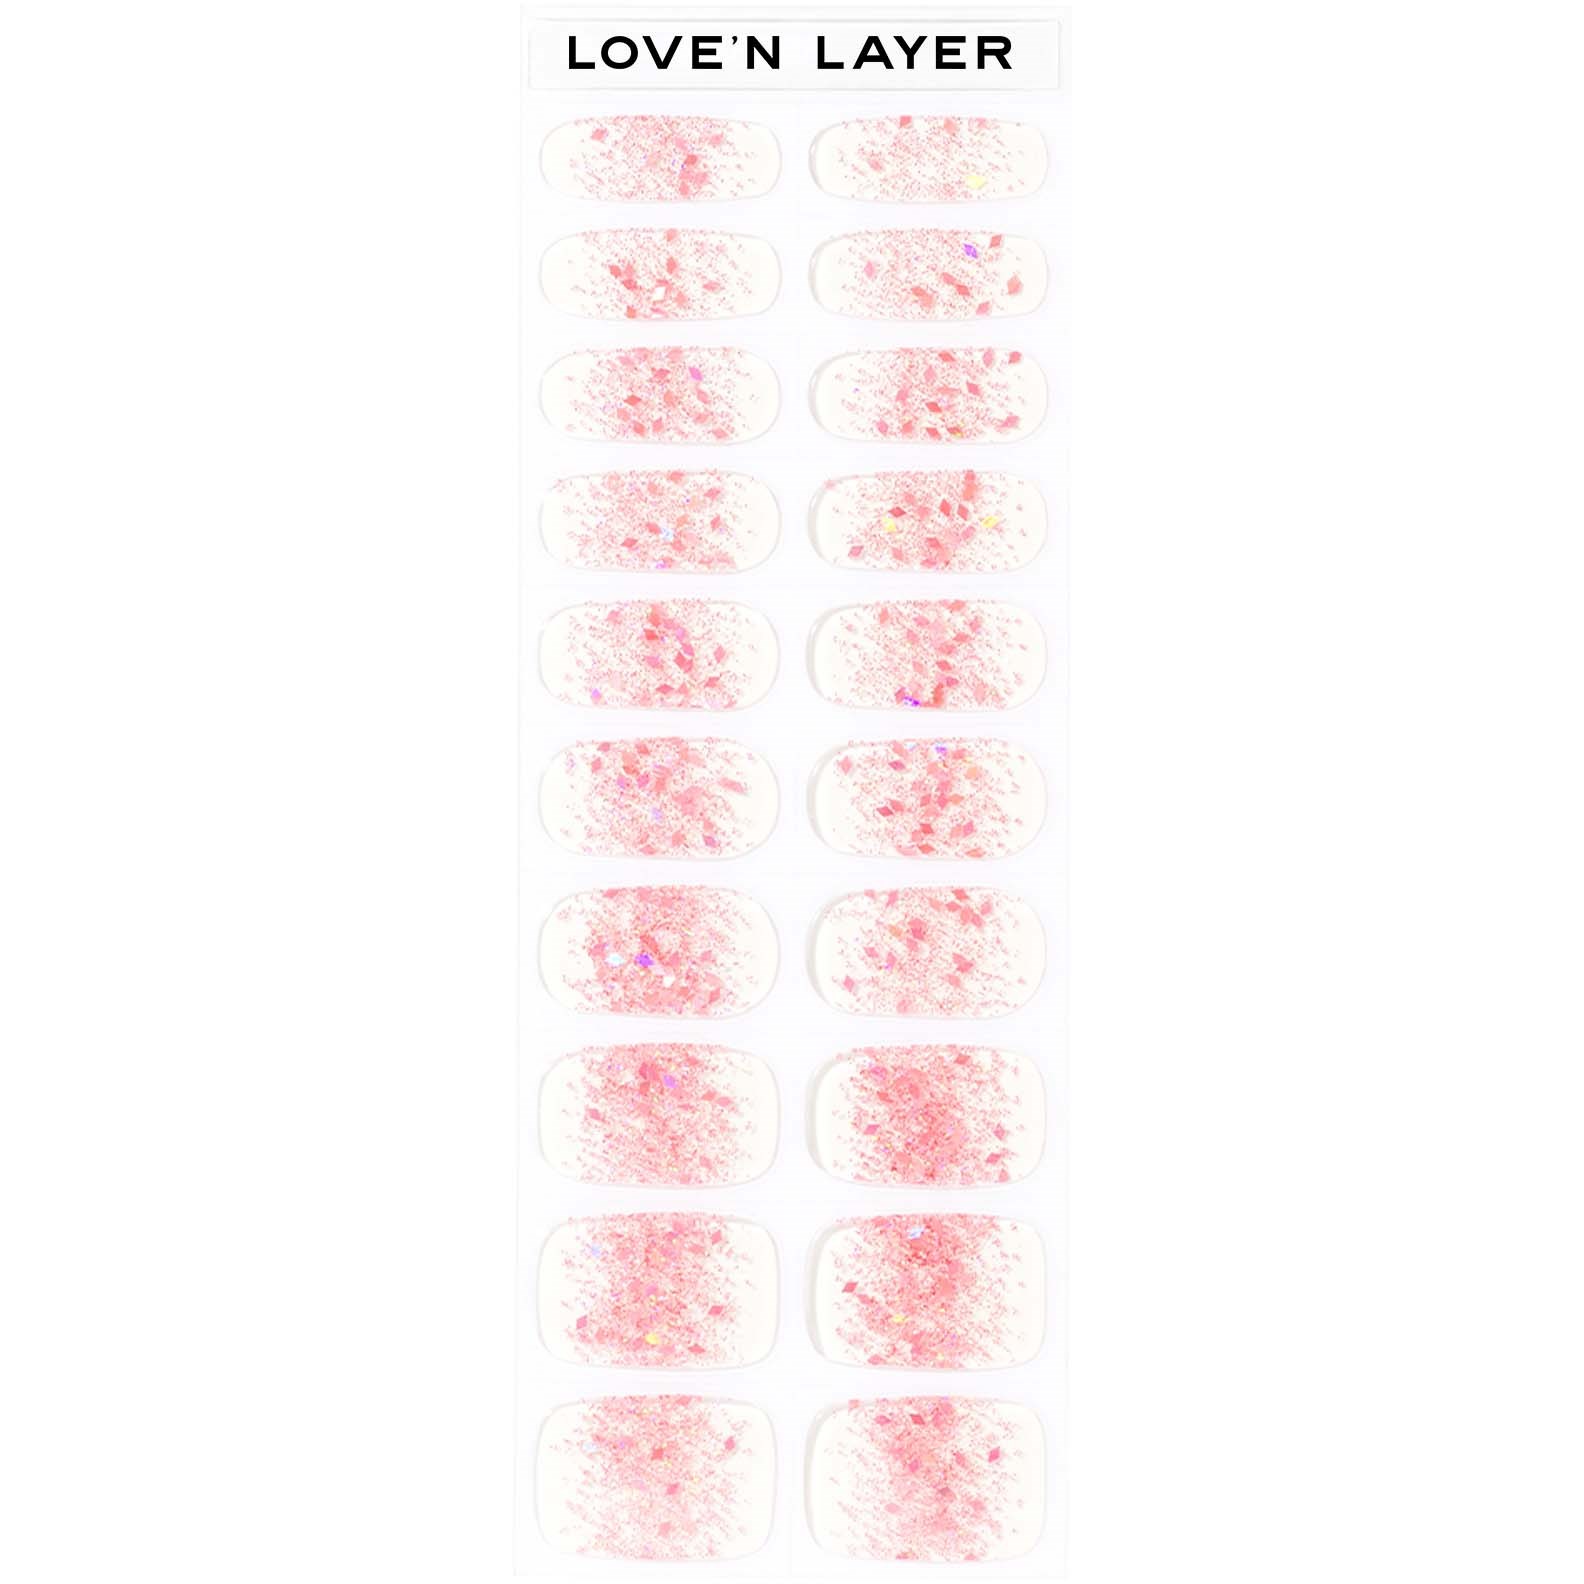 Loven Layer Love Note Funky Sparkle Pink